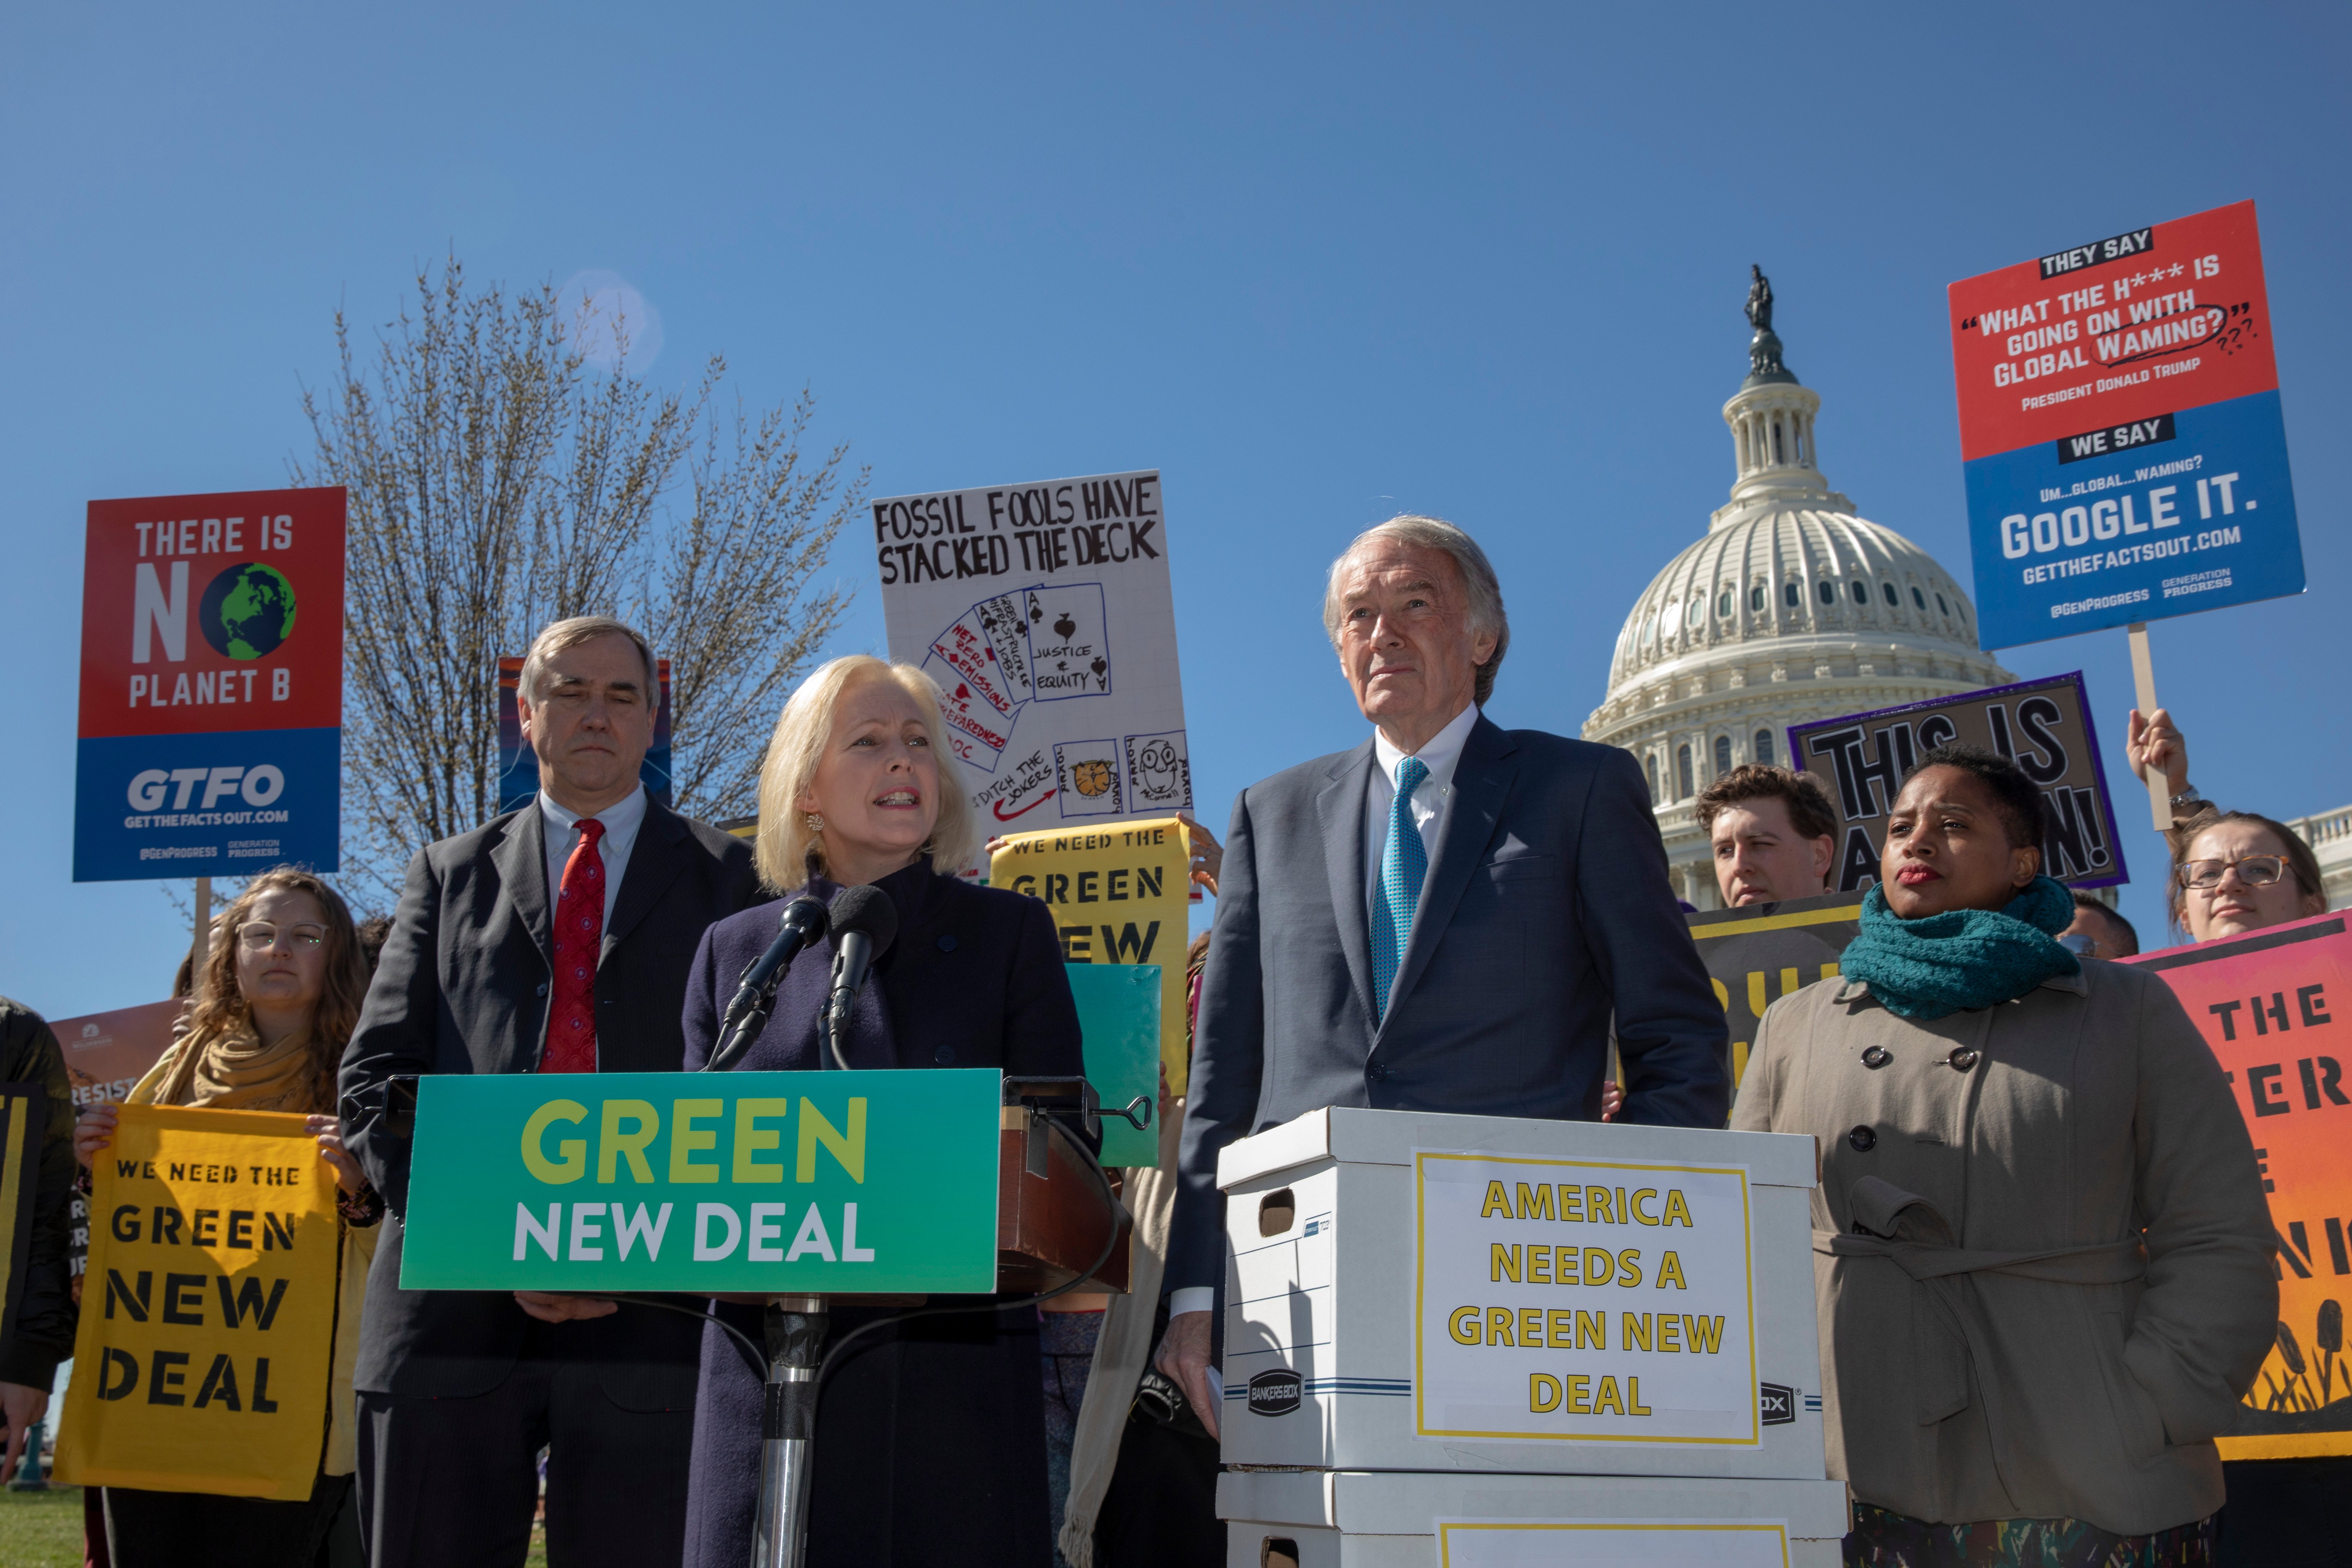 Senator Kirsten Gillibrand speaks on Capitol Hill on March 26, 2019 in Washington, DC. Protesters called for climate action in Congress and to blast Republicans for blocking real action on climate change. (Photo by Tasos Katopodis/Getty Images)